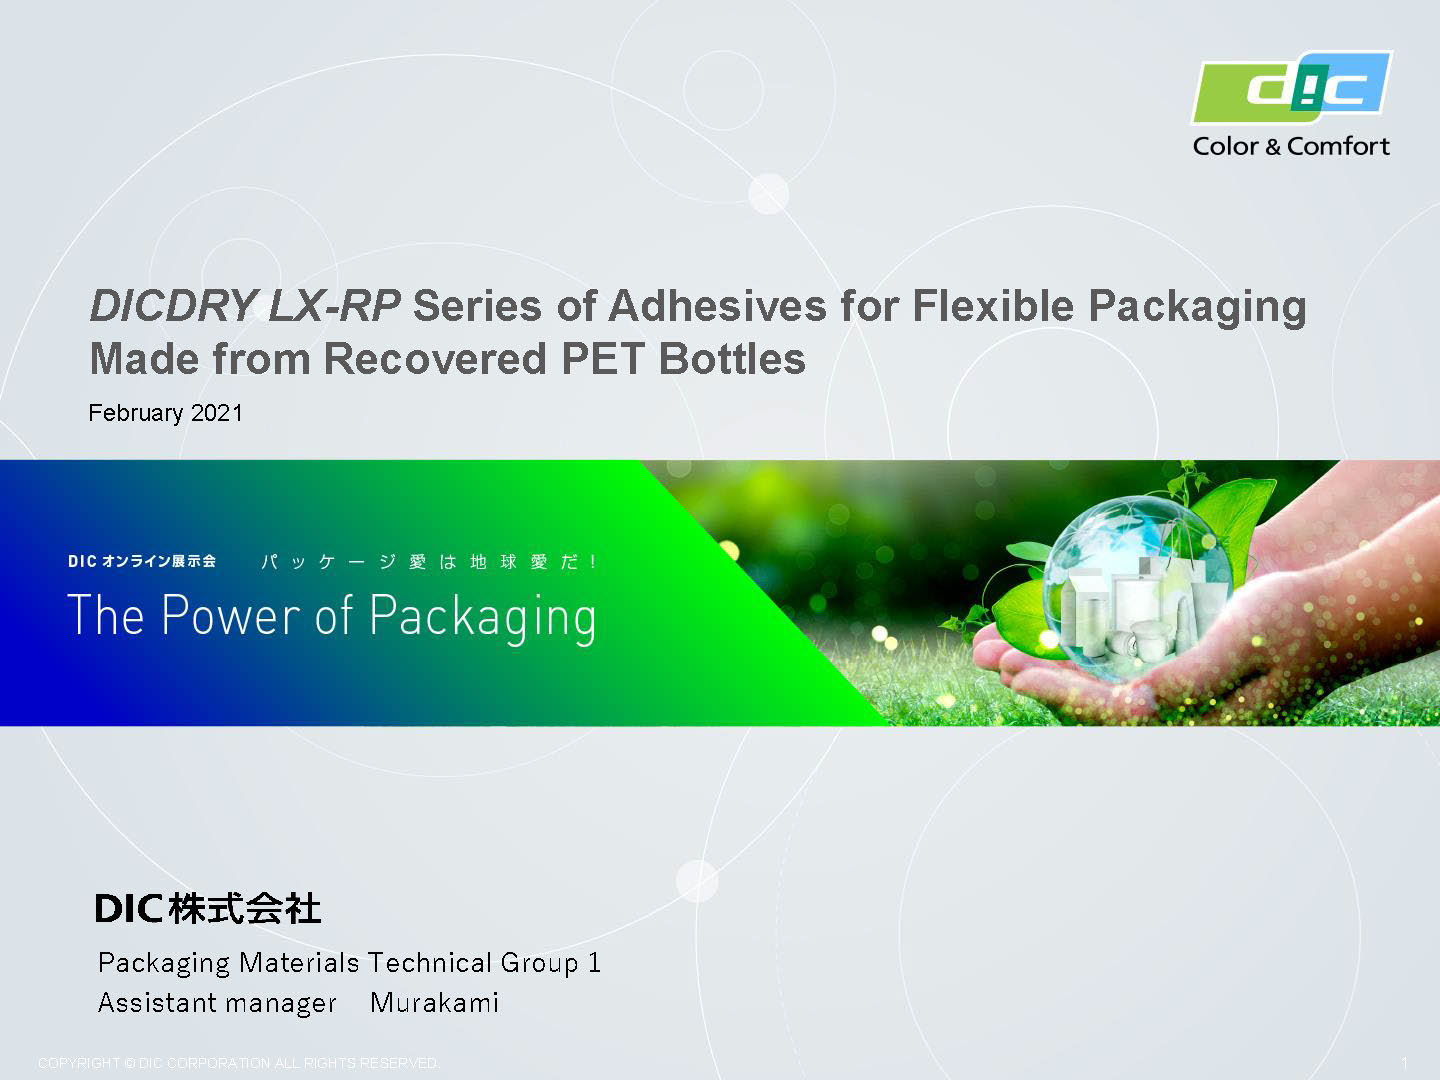 DICDRY LX-RP Series of Adhesives for Flexible Packaging Made from Recovered PET Bottles